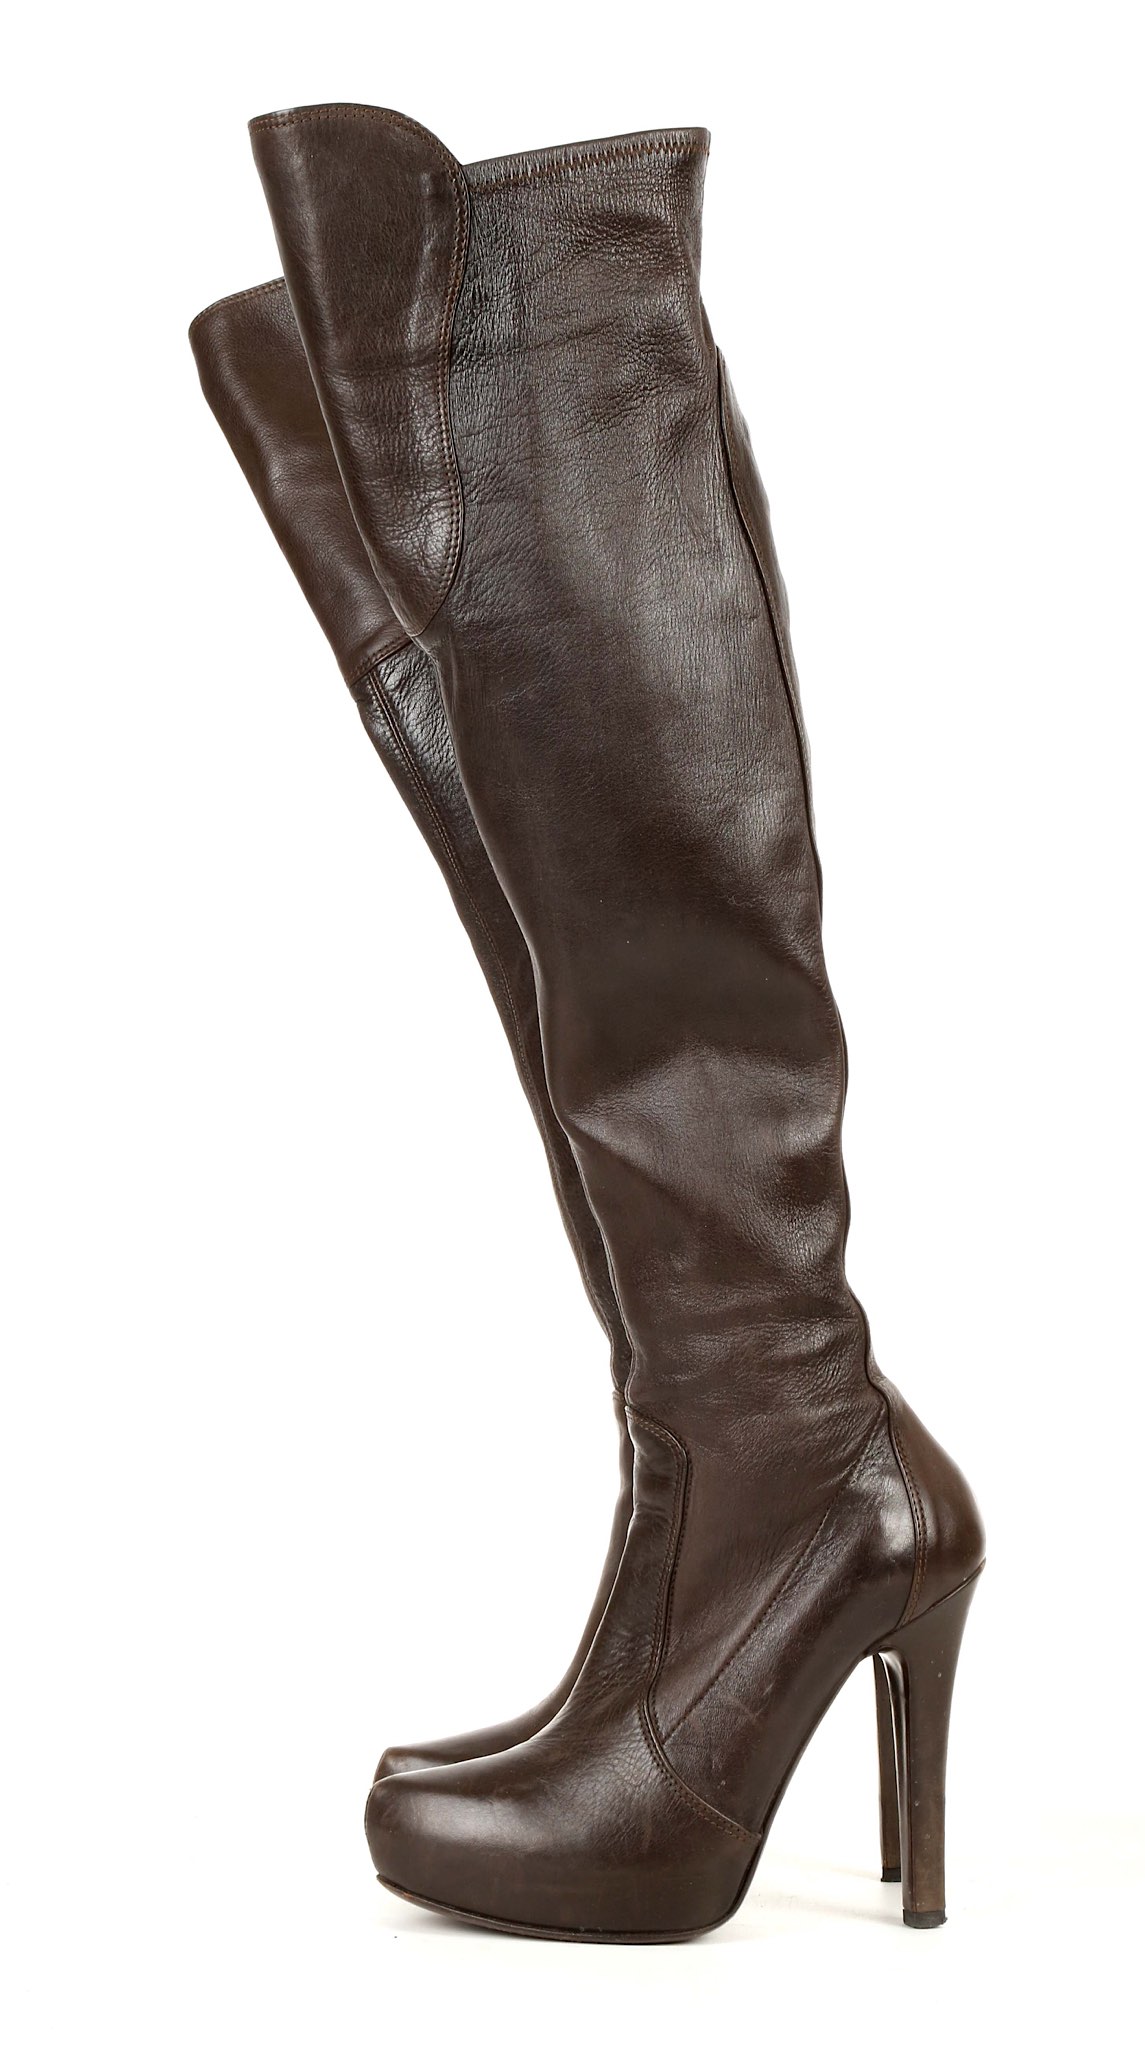 GUCCI THIGH HIGH BLACK LEATHER BOOTS, stiletto heel, size 38, and a pair of brown Casadei boots - Image 7 of 8